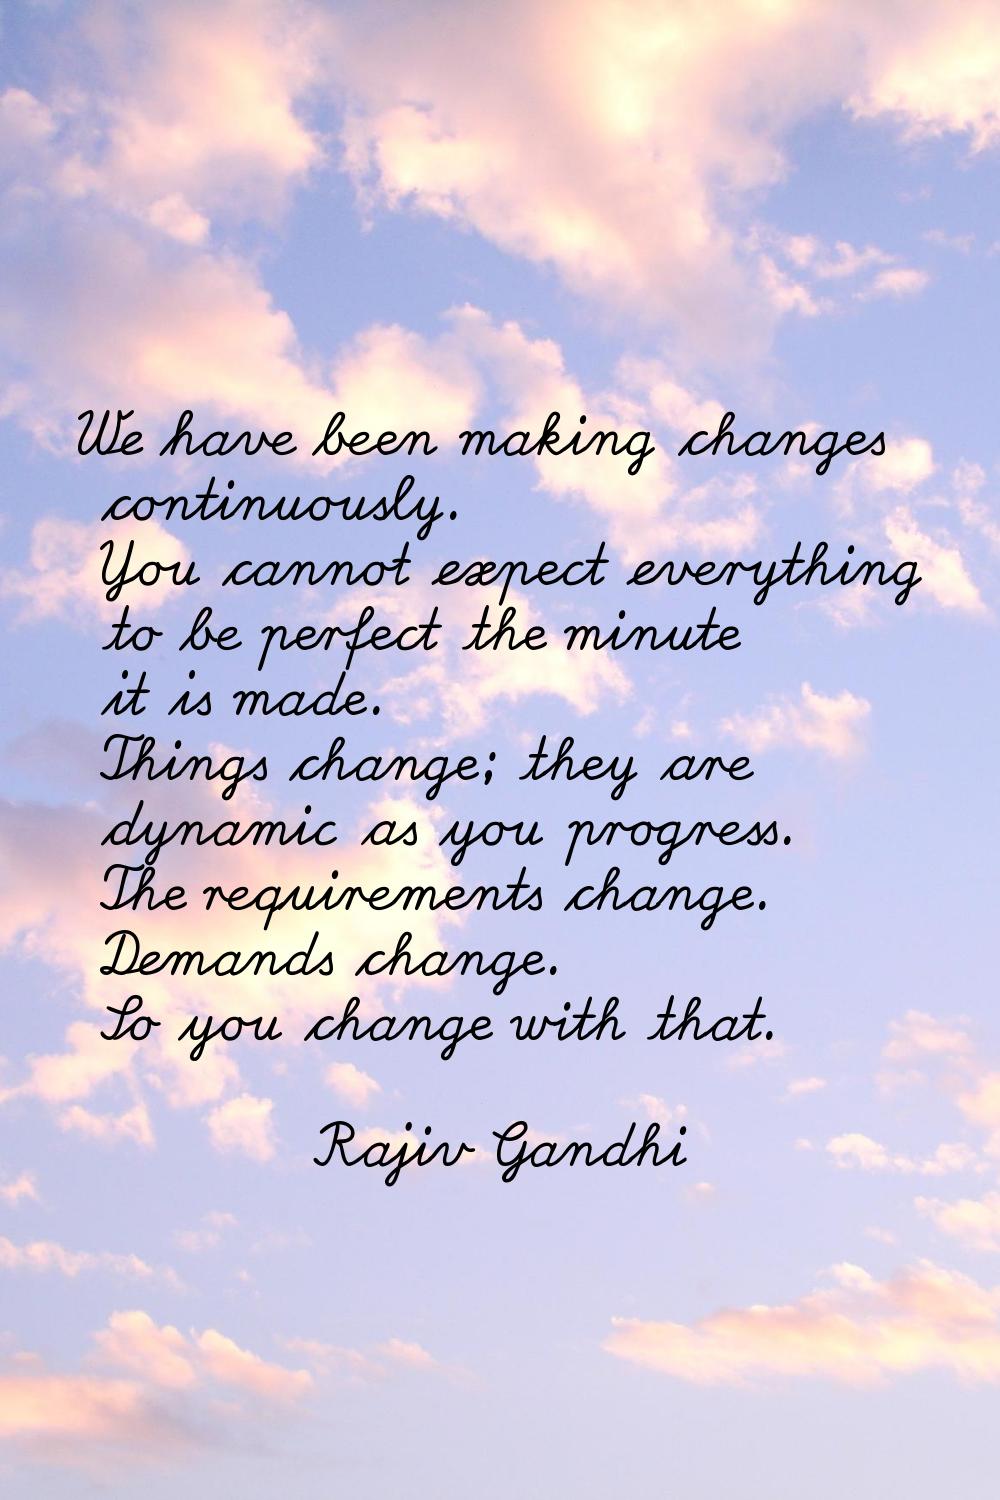 We have been making changes continuously. You cannot expect everything to be perfect the minute it 